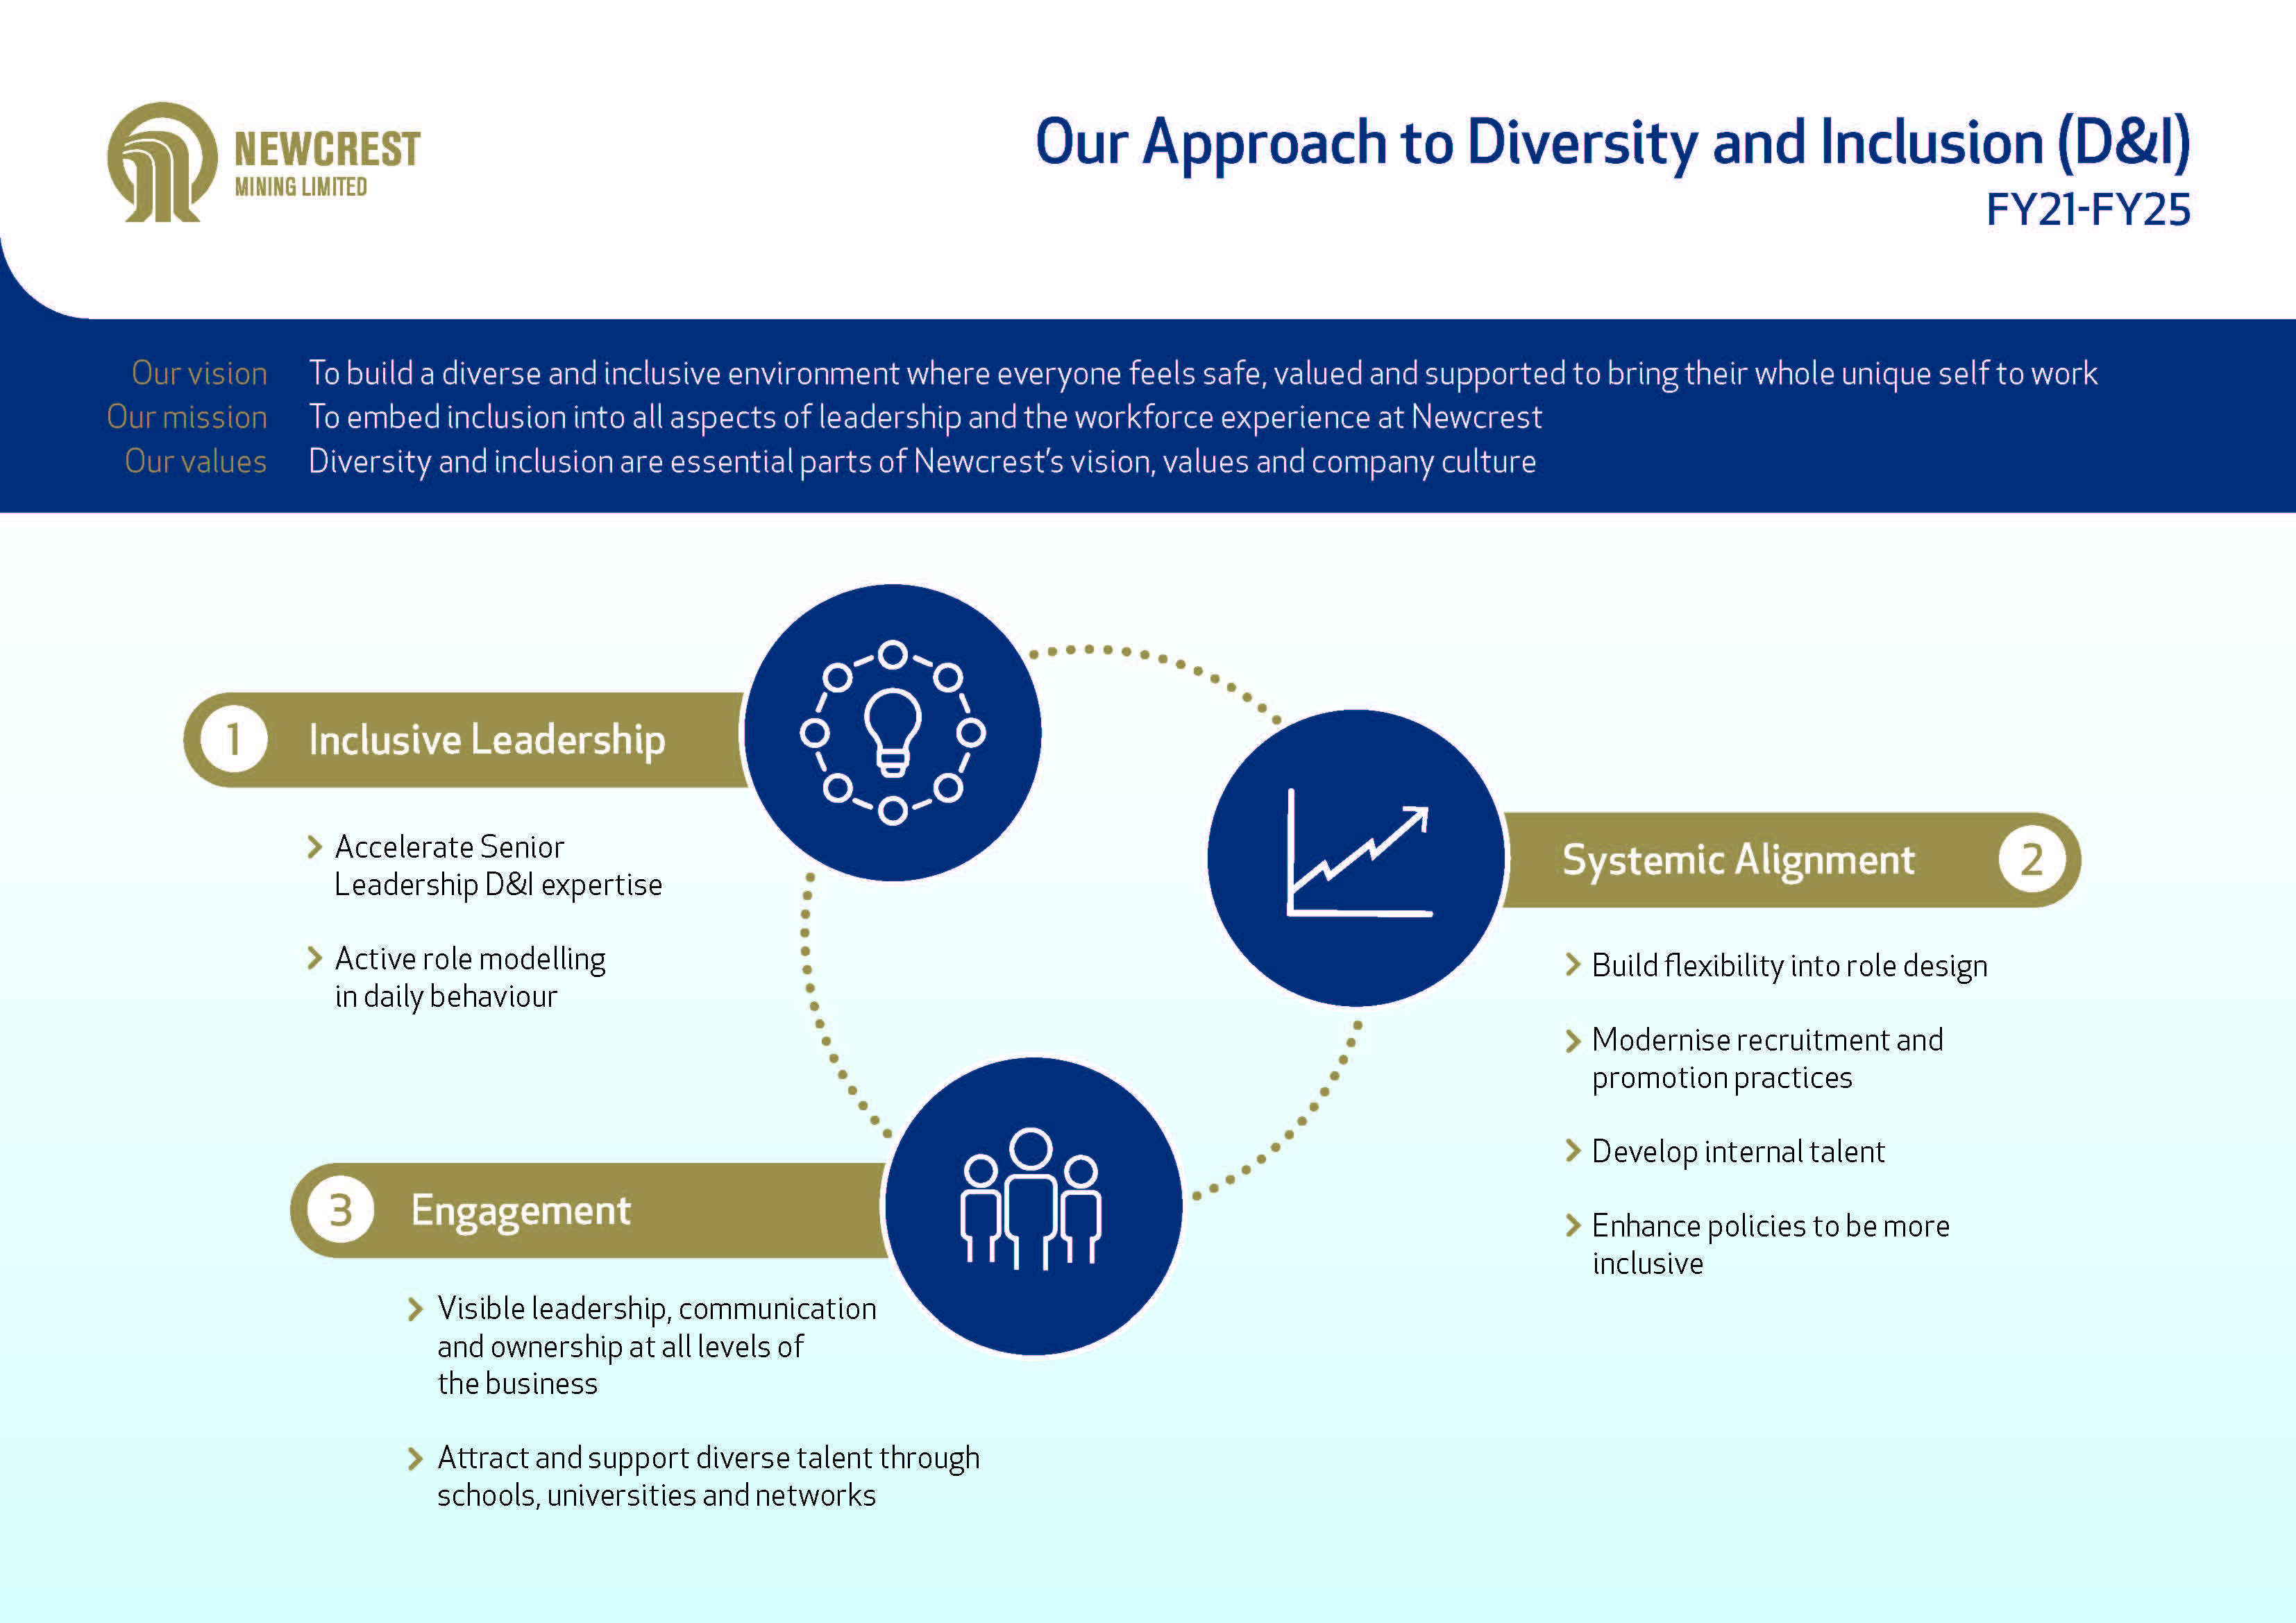 Our approach to Diversity and Inclusion